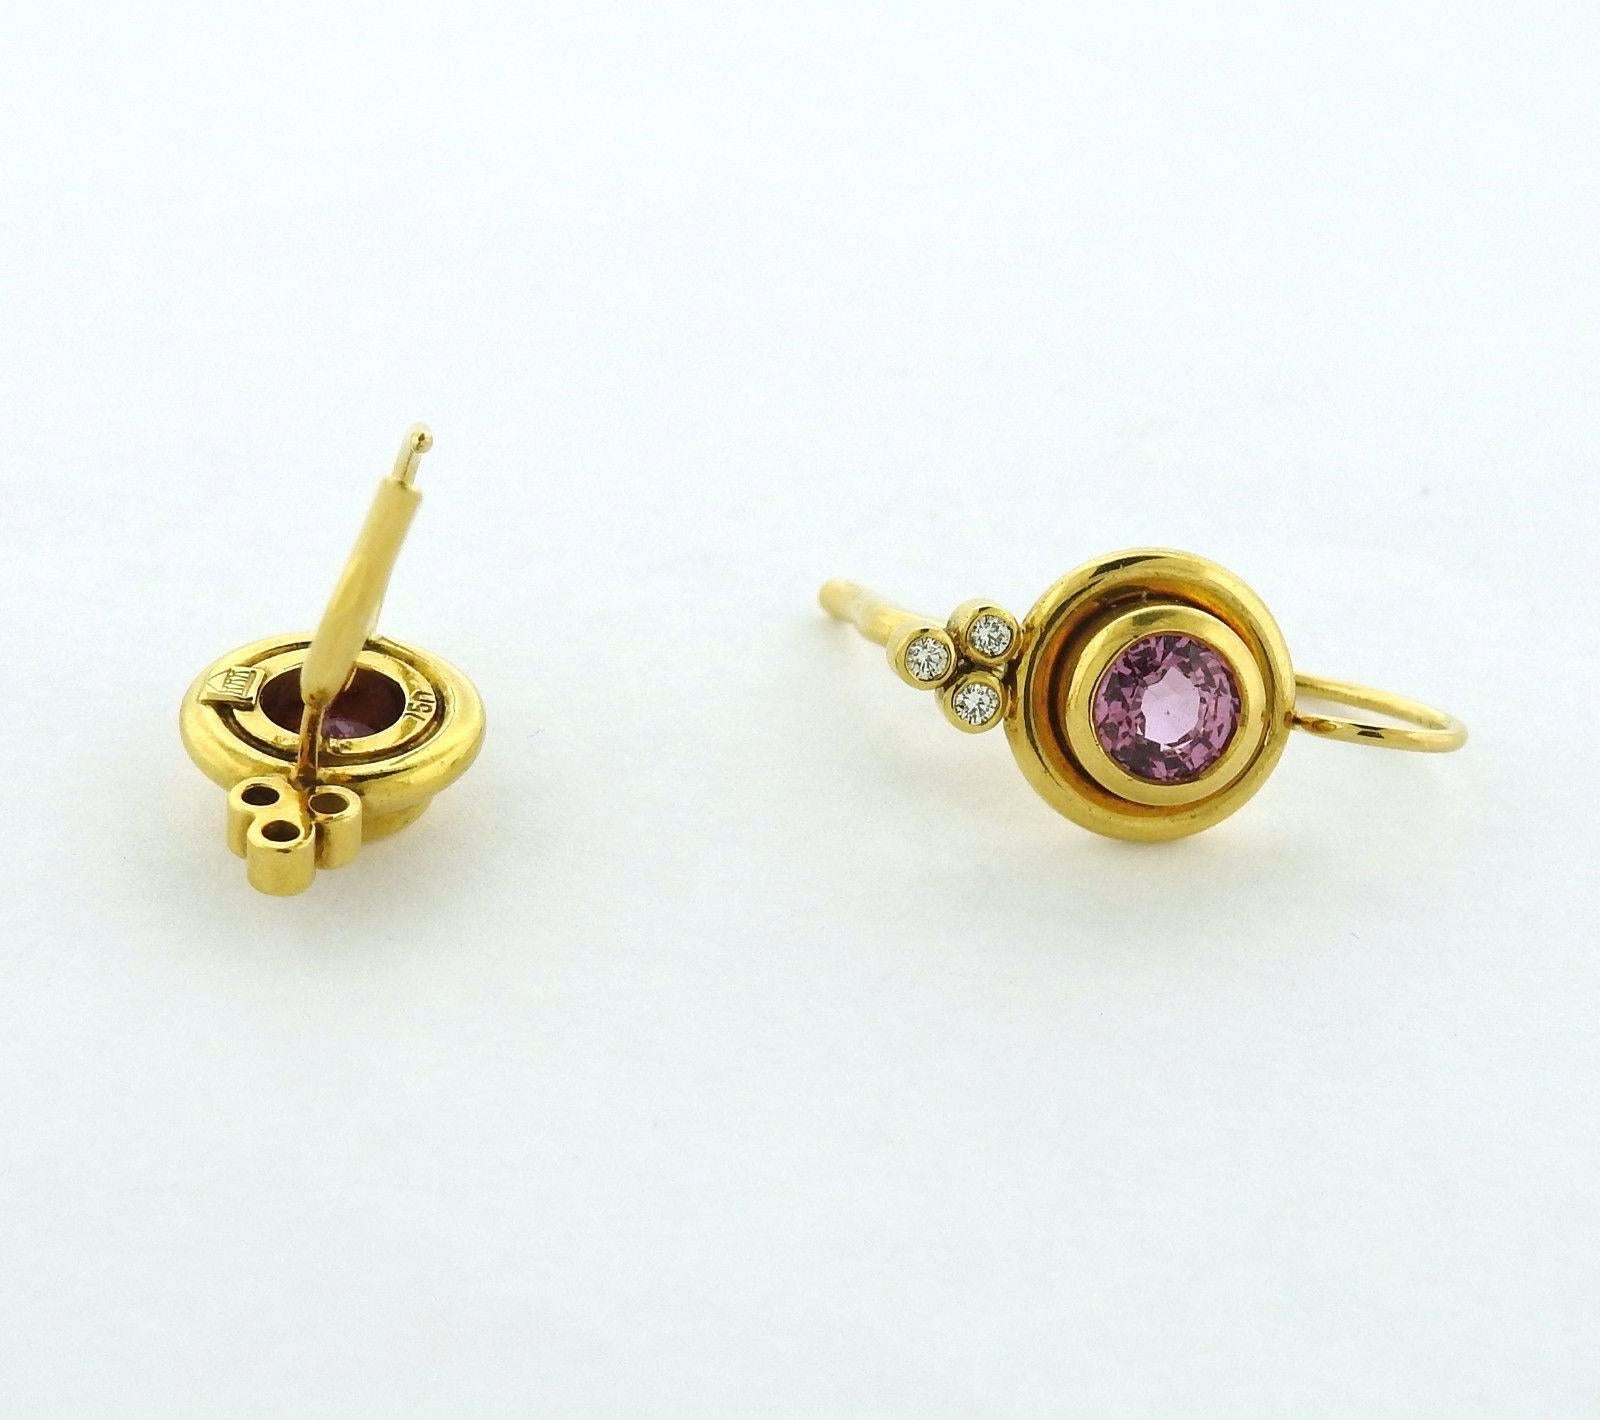 A pair of 18k yellow gold earrings set with pink tourmaline and 0.09ctw of G/VS diamonds.  The earrings are 21mm long with wire x 11mm wide.  The weight of the pair is 6.6 grams.  Marked: Temple mark, 750. Current retail is $4200.